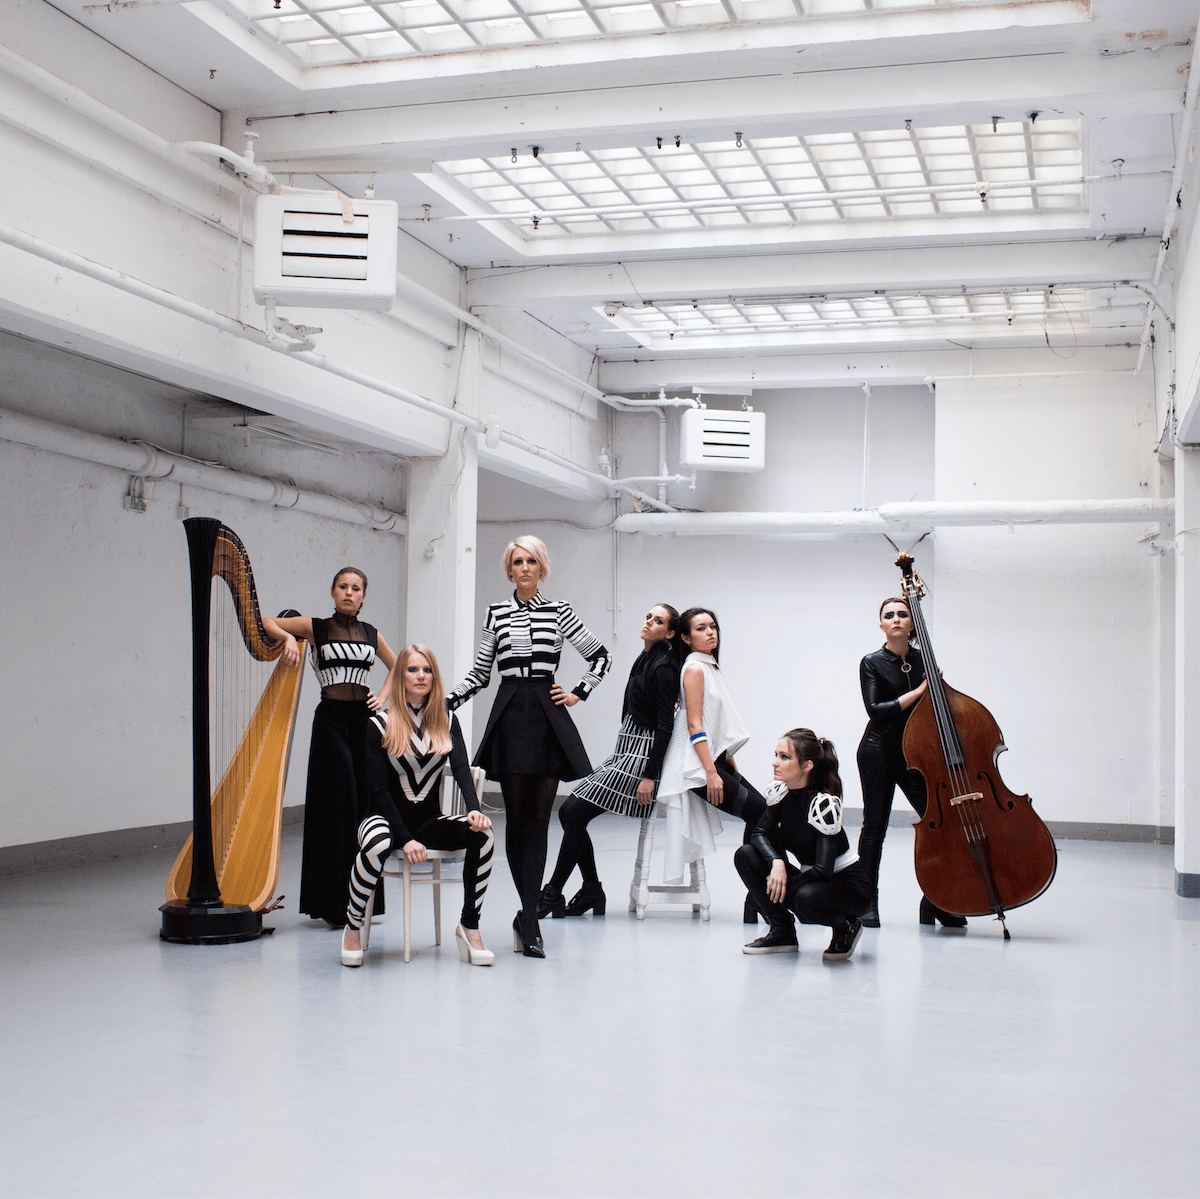 Kate Simko and The London Electronic Orchestra: Momentum